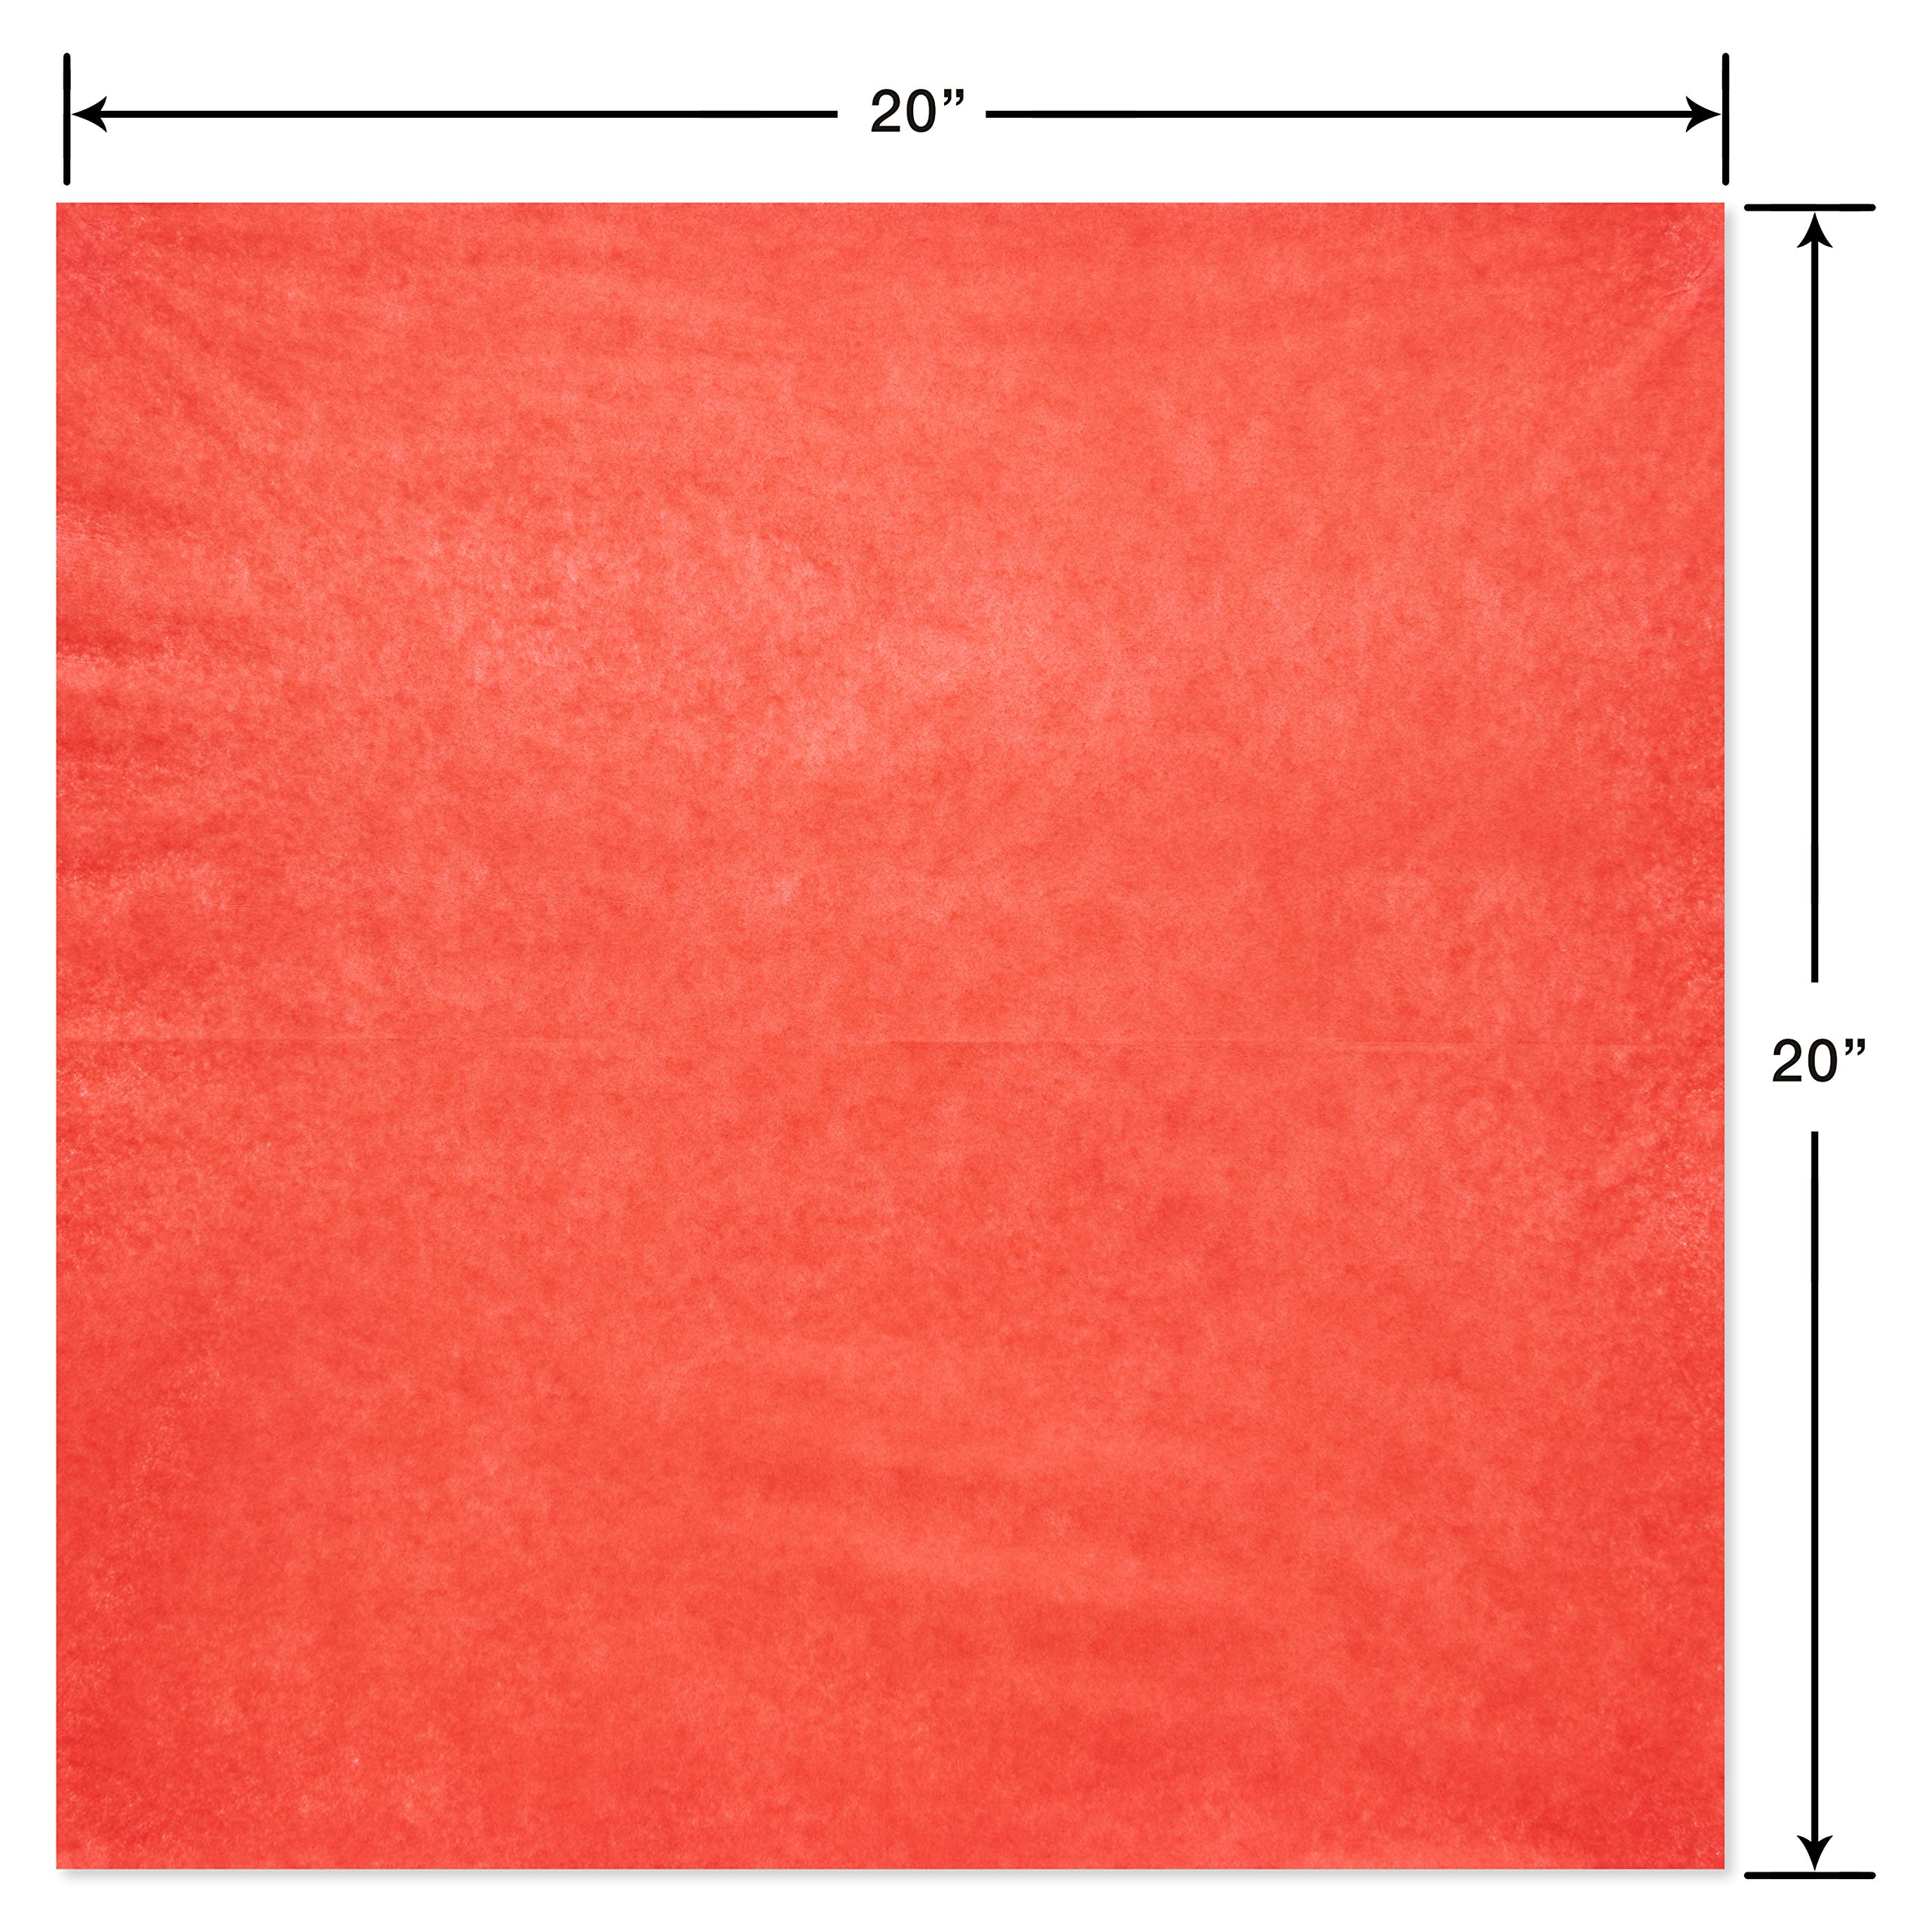 American Greetings Bulk Cherry Red Tissue Paper for Christmas, Holidays, and Special Occasions (125-Sheets)